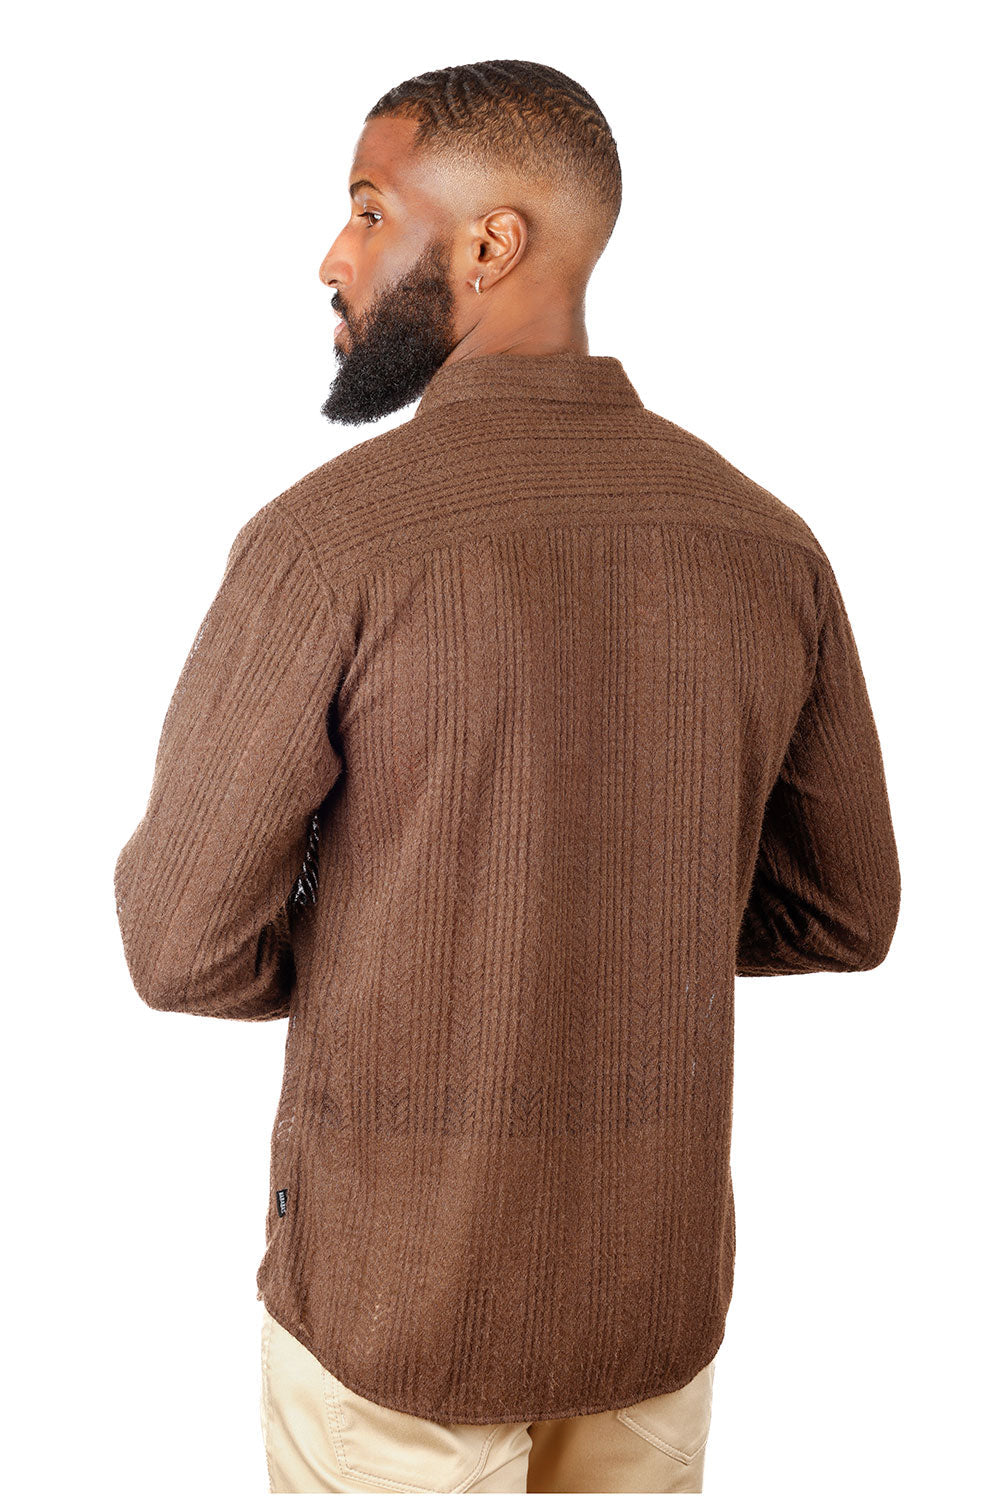 BARABAS Men's Cable Knit Wool Stretch Soft Long Sleeve Shirts 3B26 Chocolate